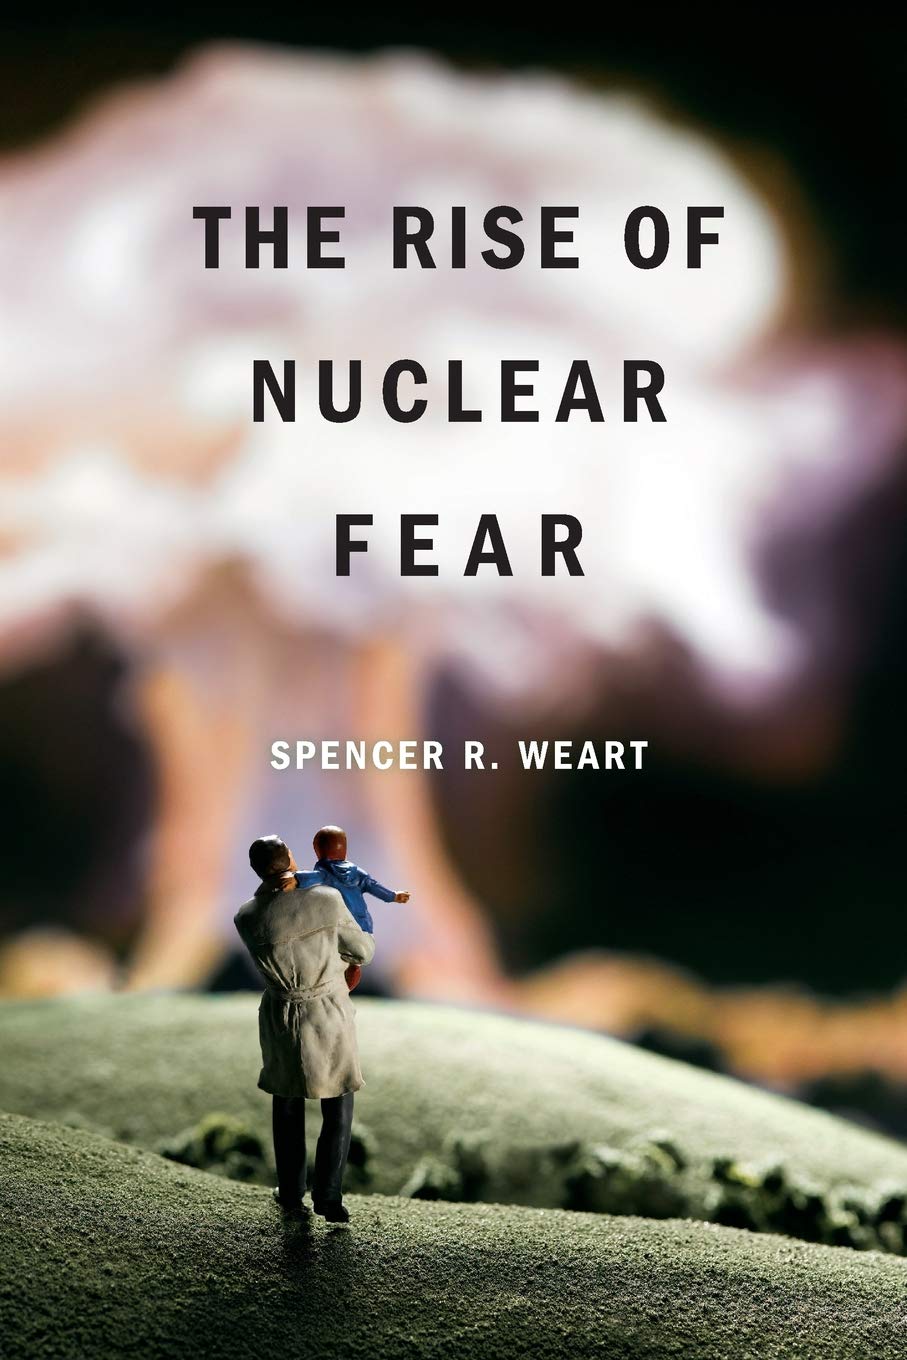 The Rise of Nuclear Fear